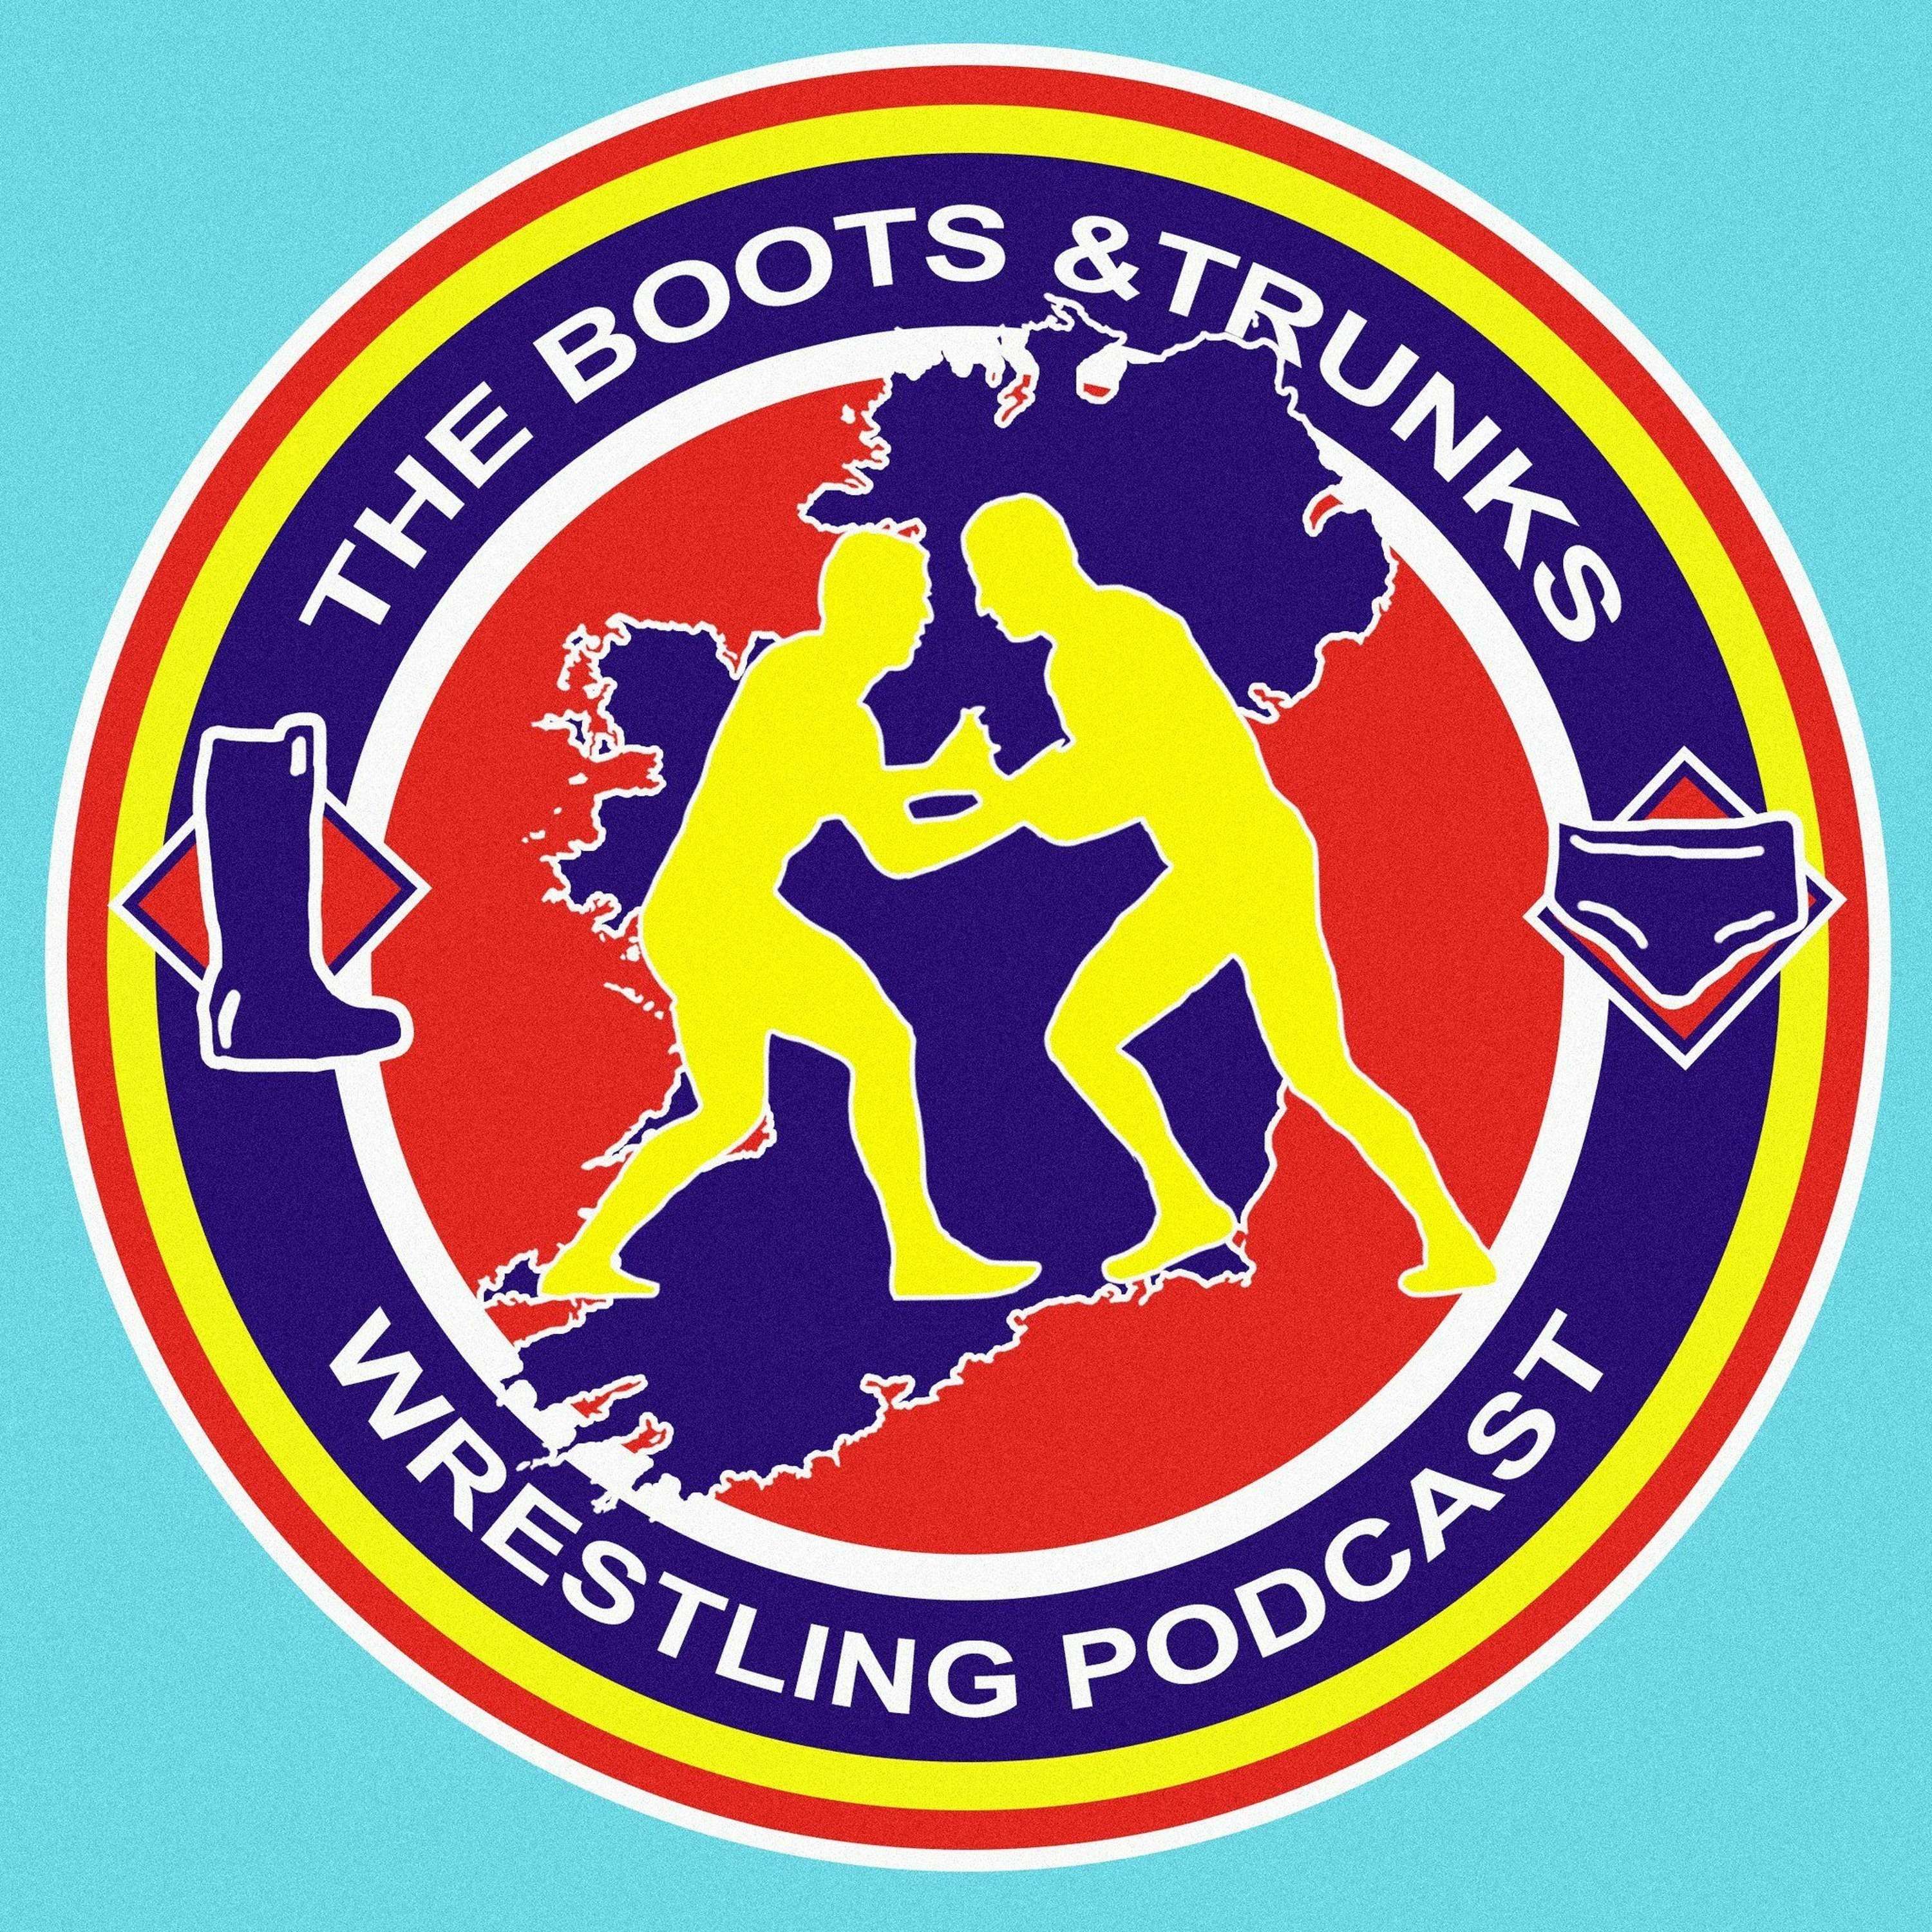 Boots and Trunks Podcast: Episode 5 - A Star Was Born